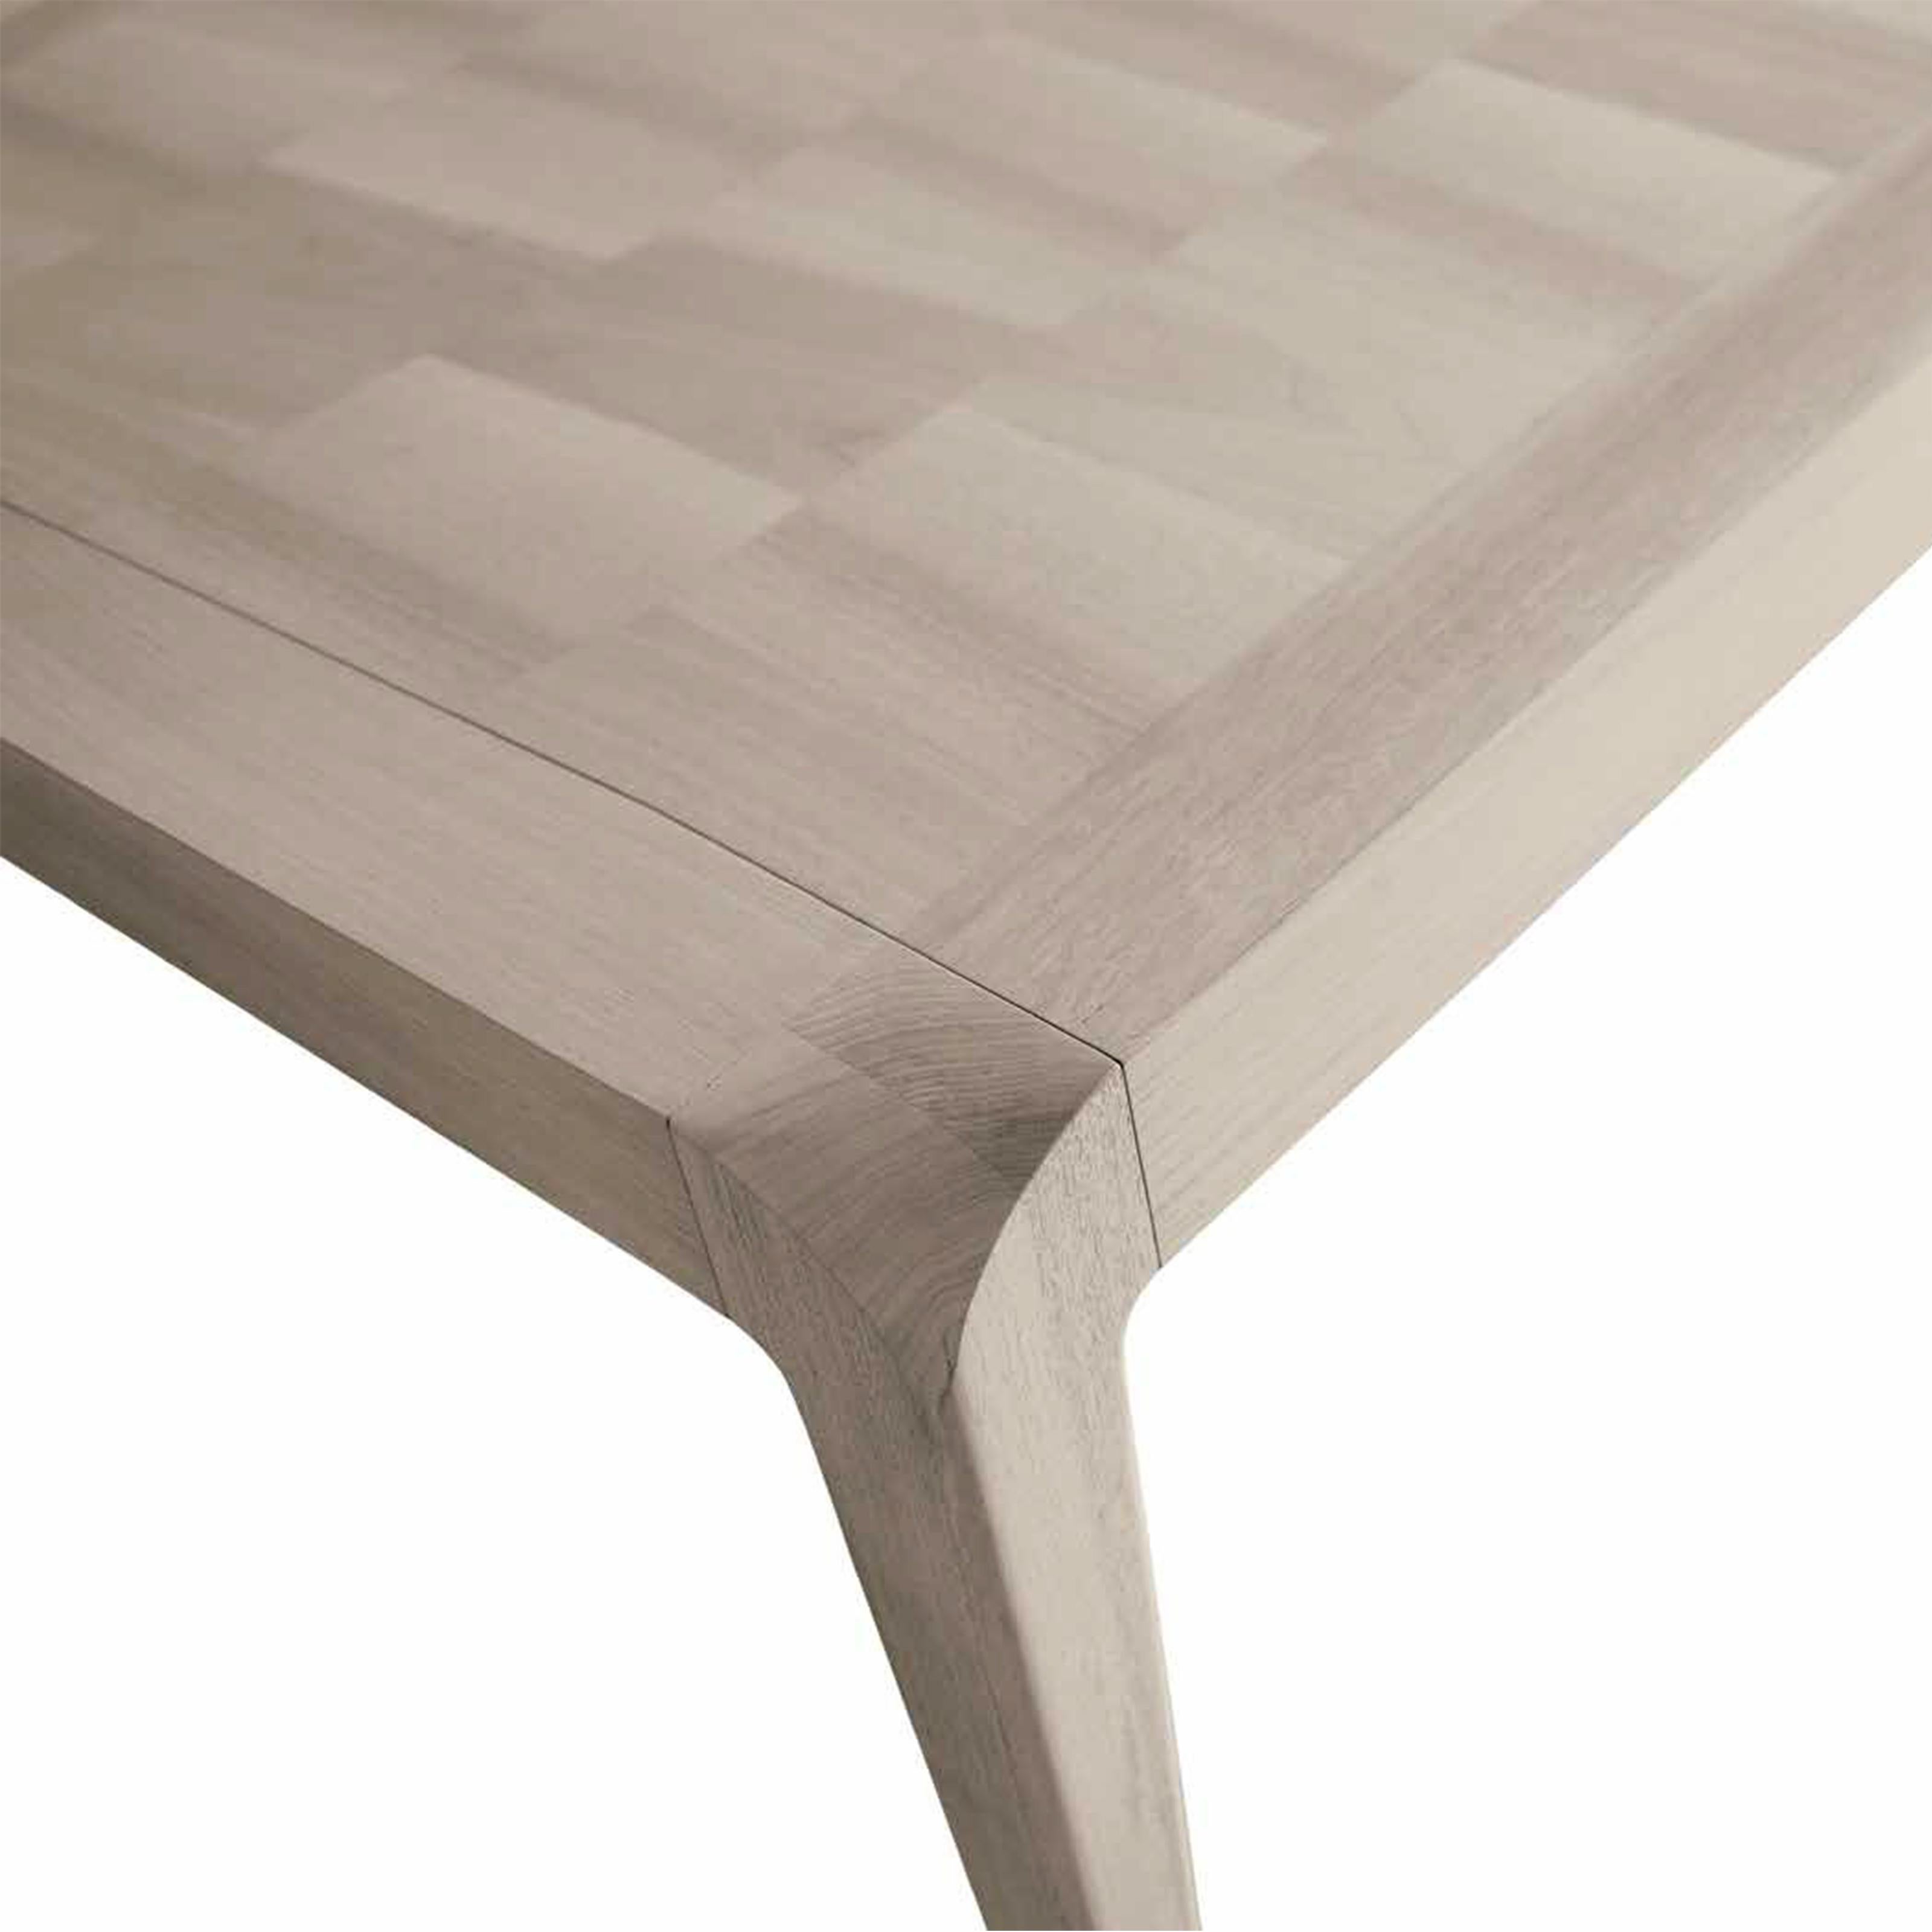 Modern Sentiero Solid Wood Table, Walnut in Hand-Made Natural Grey Finish, Contemporary For Sale